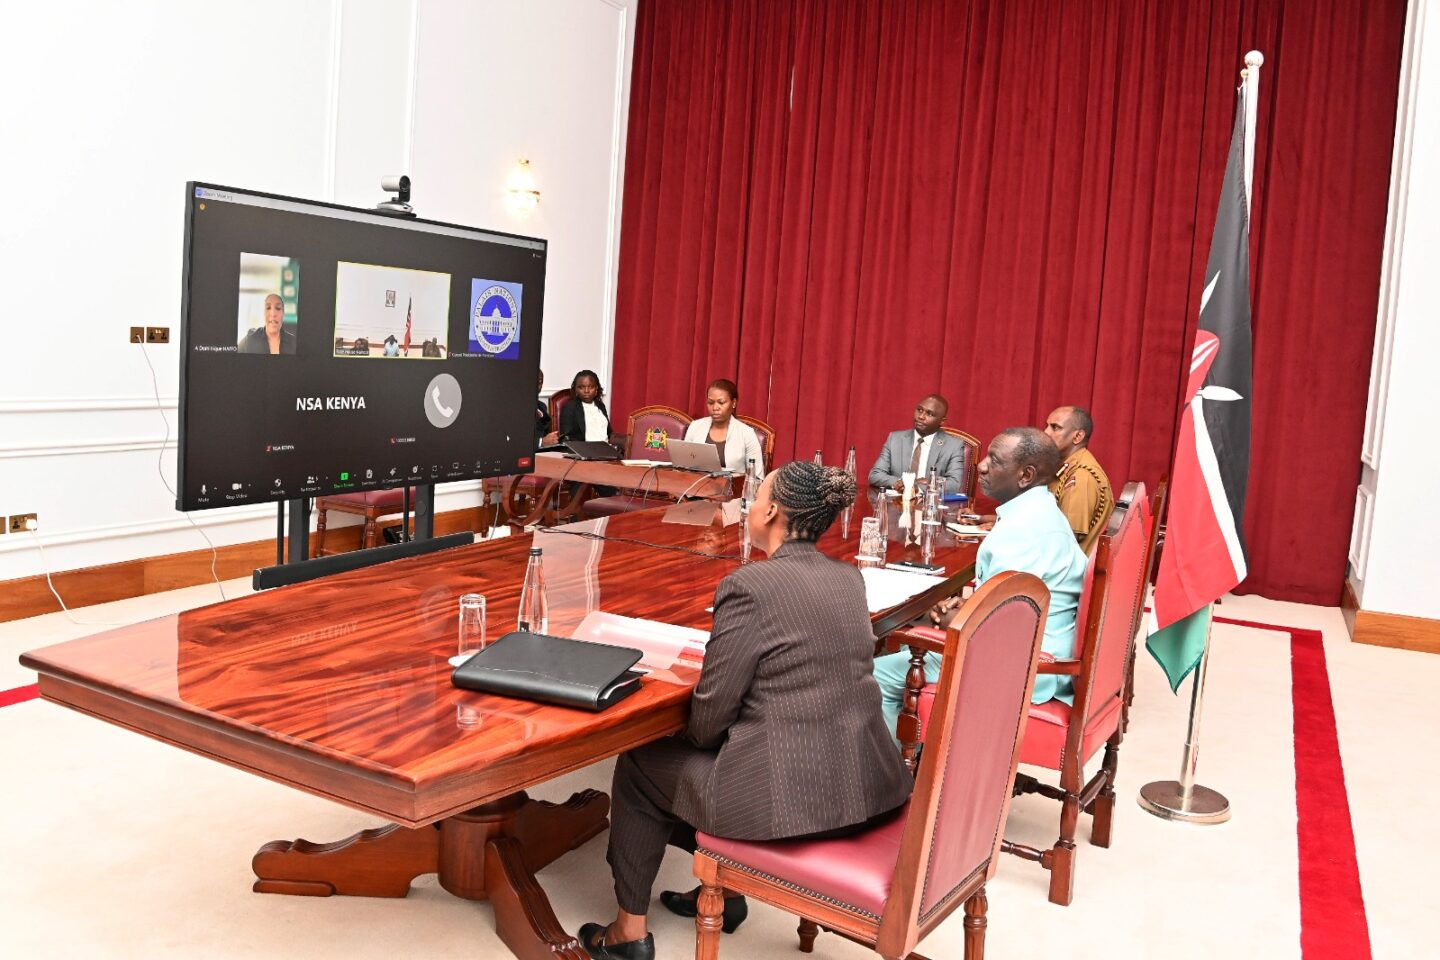 virtual-interview-between-edgar-leblanc-fils-and-william-ruto-on-the-mmss